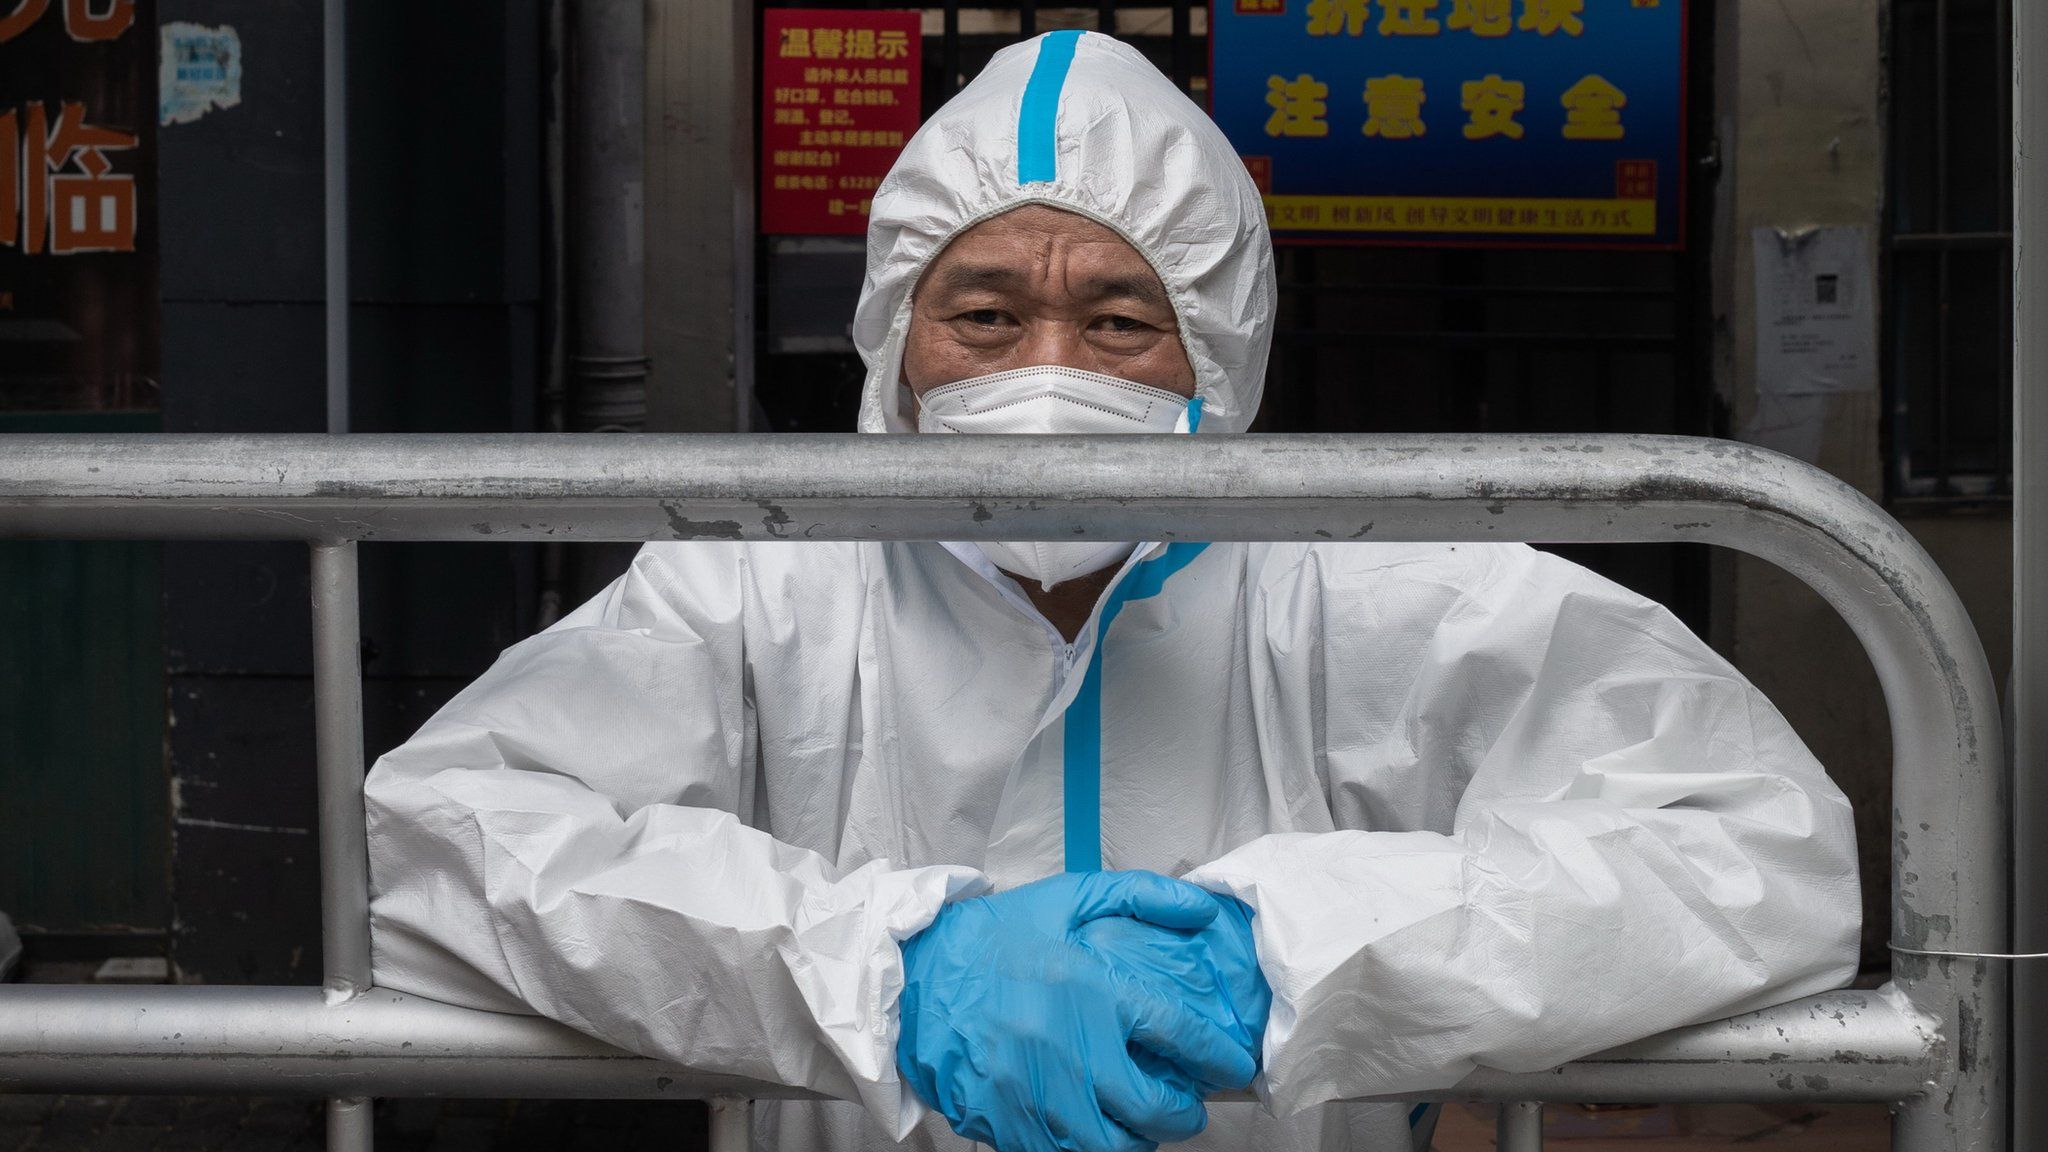 A worker in PPE guards at a position set up in the great Covid-19 lockdown in Shanghai, China.